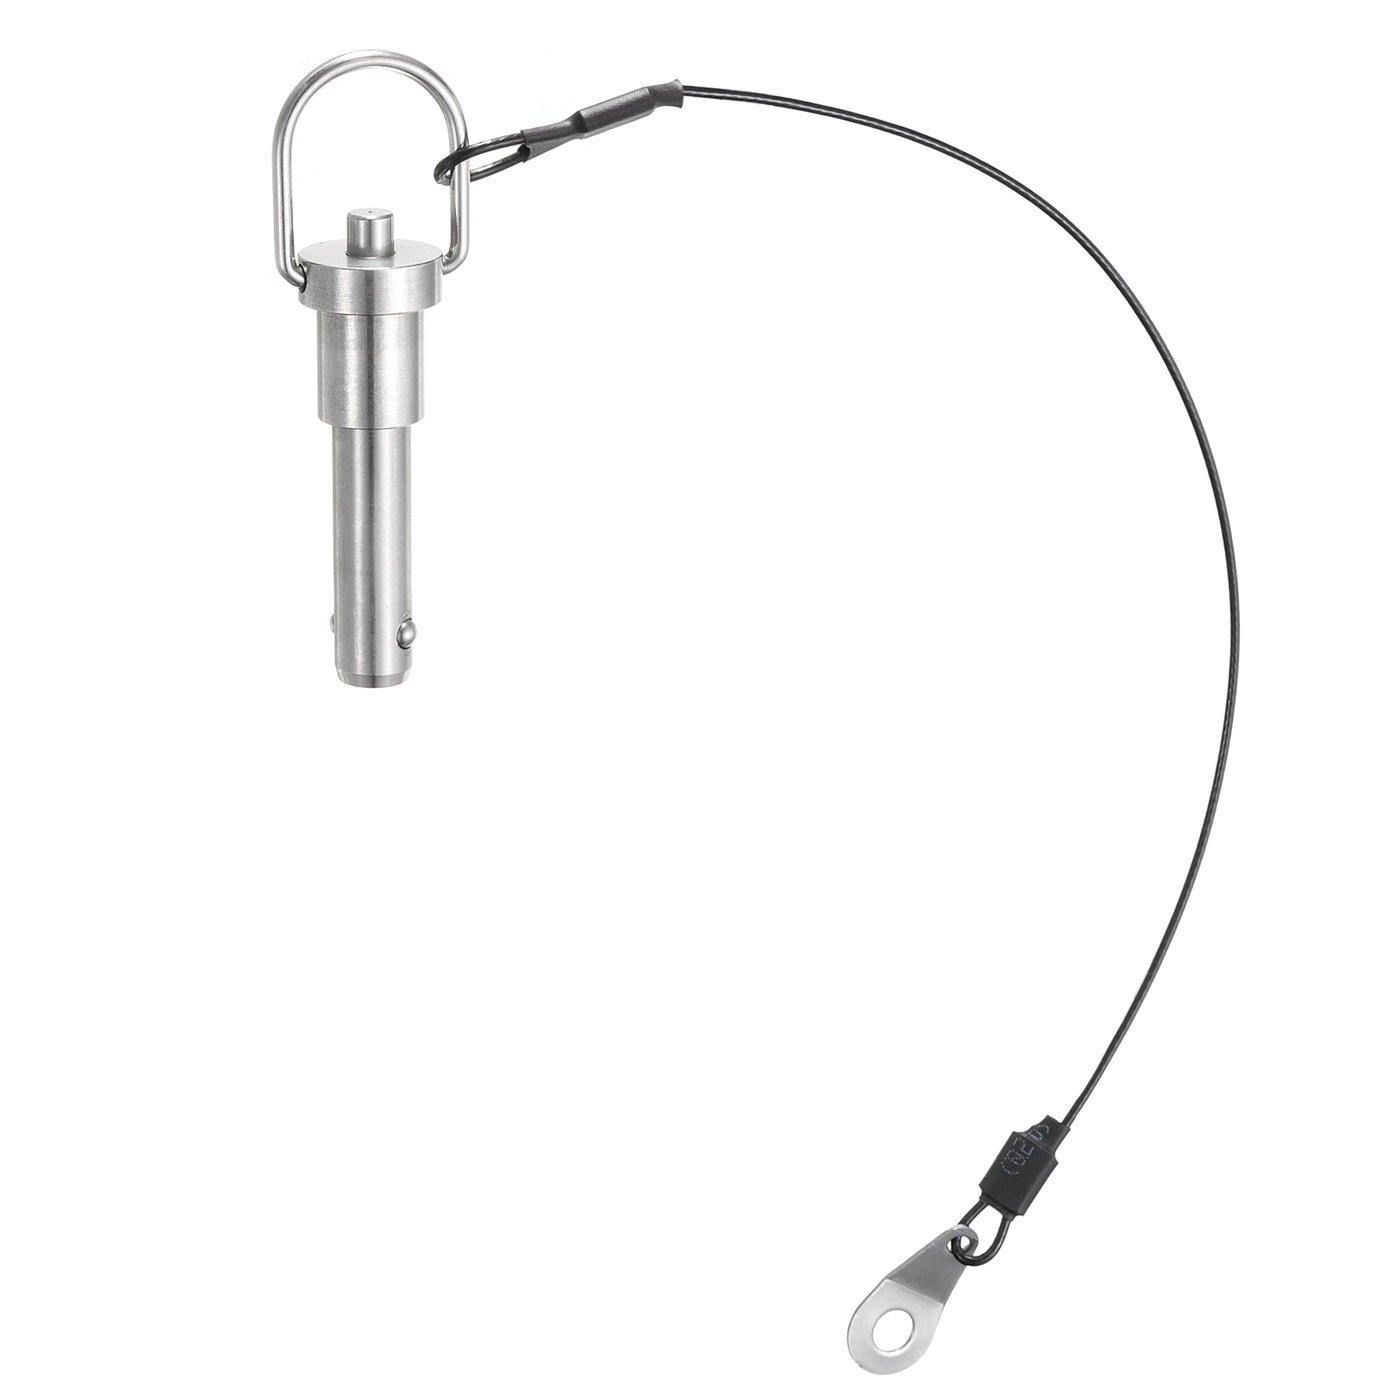 uxcell Uxcell Ball Locking Pins with Button Handle, 10mm Pin Dia. 25mm Usage Length Push-Button Quick Release Pin with Lanyard Cable, 304 Stainless Steel